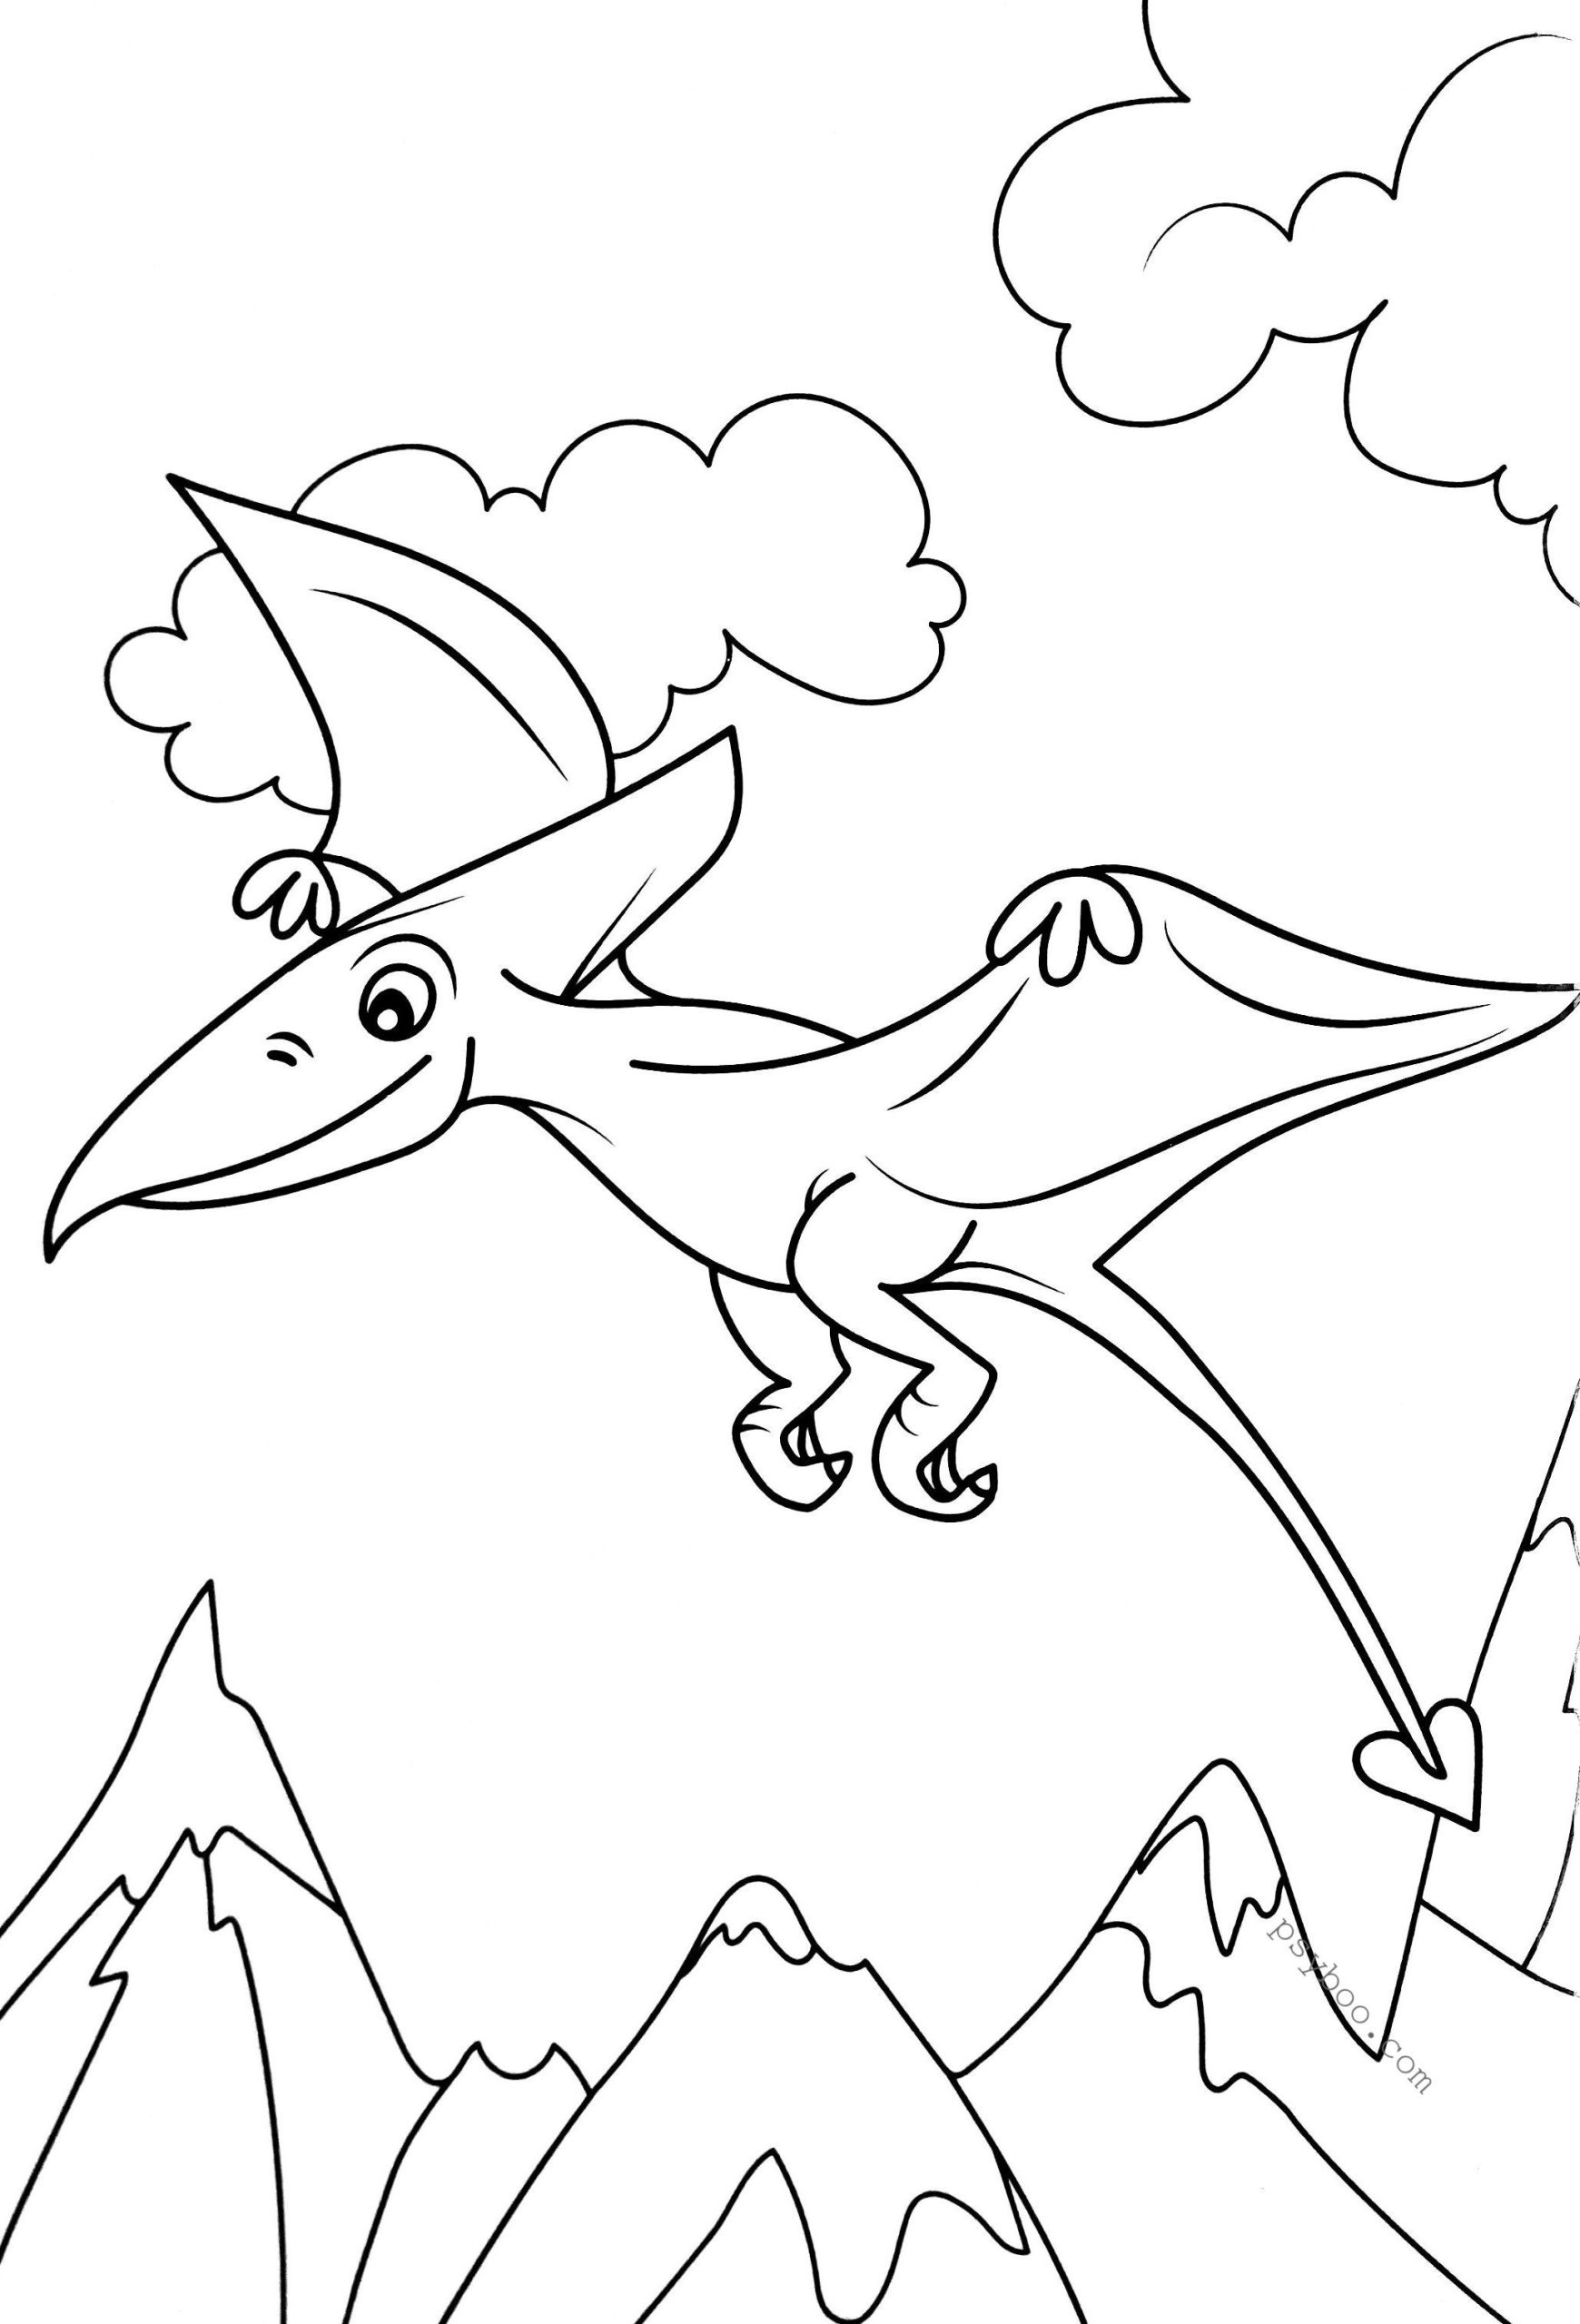 Little Dinosaur Pterodactyl Coloring Page for Free